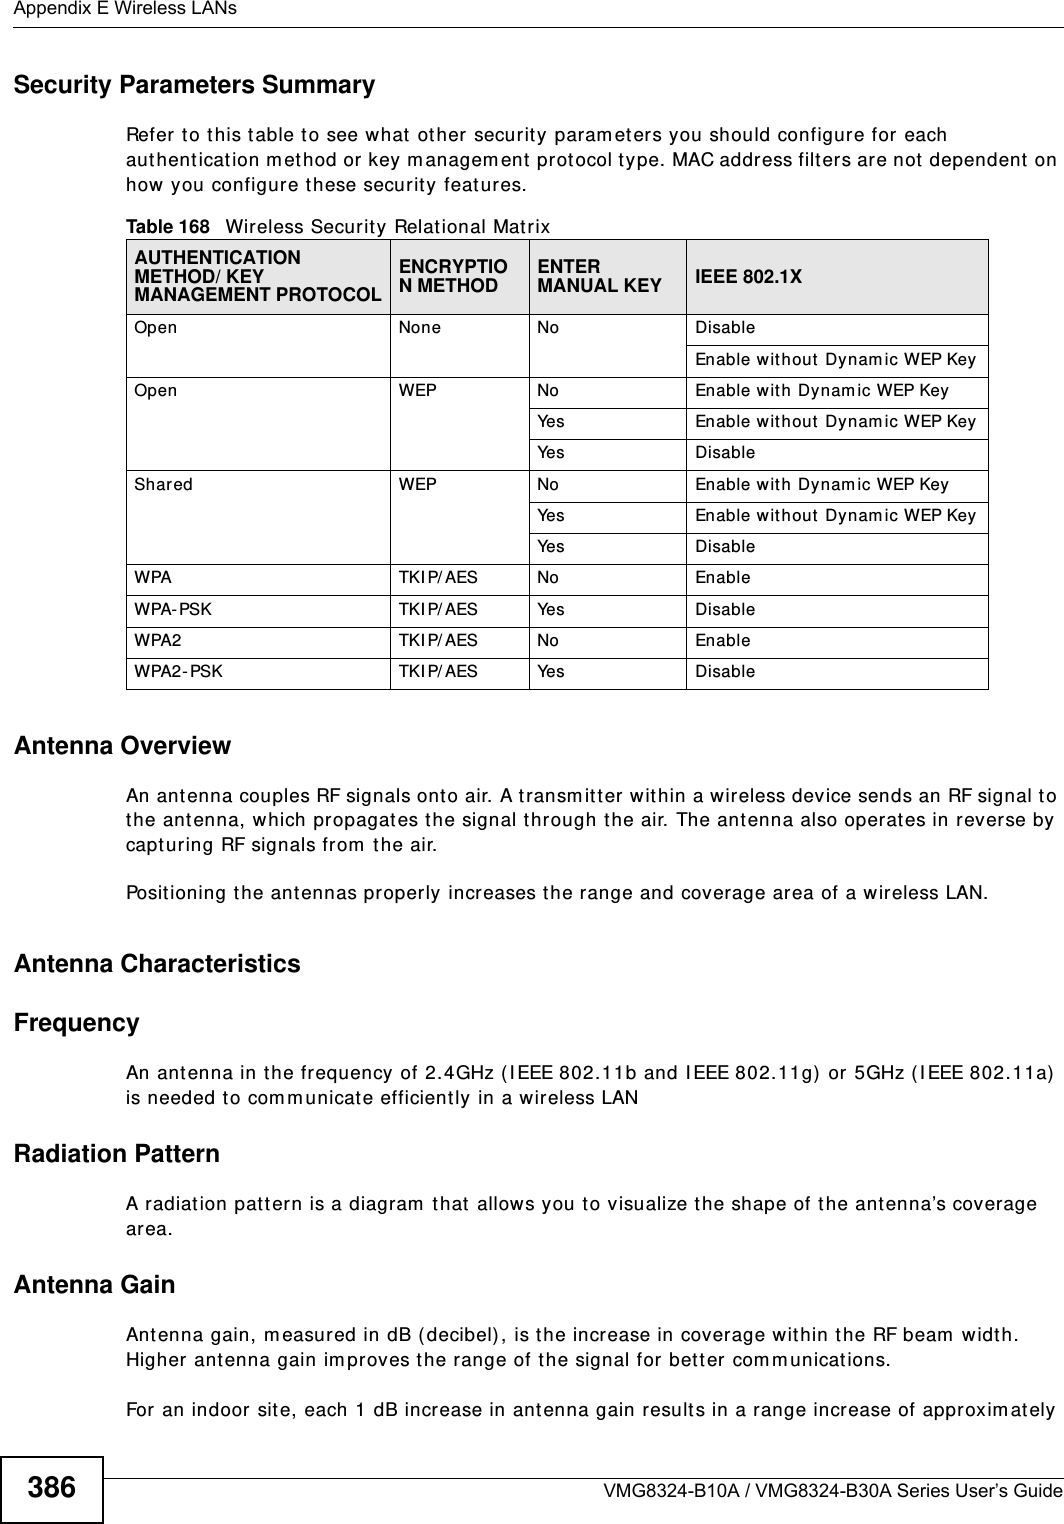 Appendix E Wireless LANsVMG8324-B10A / VMG8324-B30A Series User’s Guide386Security Parameters SummaryRefer to this t able to see what  other security param eters you should configure for each authent icat ion m et hod or key m anagem ent  prot ocol type. MAC address filters are not  dependent on how you configure these securit y features.Antenna OverviewAn ant enna couples RF signals ont o air. A transm it ter w ithin a wireless device sends an RF signal t o the ant enna, which propagates t he signal t hrough the air. The antenna also operates in rever se by capturing RF signals from  t he air. Positioning the antennas properly increases the range and coverage area of a wireless LAN. Antenna CharacteristicsFrequencyAn ant enna in the frequency of 2.4GHz ( I EEE 802.11b and I EEE 802.11g) or 5GHz (I EEE 802.11a)  is needed t o com m unicate efficiently in a wireless LANRadiation PatternA radiat ion patt ern is a diagram  that allow s you to visualize the shape of t he antenna’s coverage area. Antenna GainAntenna gain, m easured in dB ( decibel) , is t he increase in coverage wit hin the RF beam  width. Higher antenna gain im proves the range of the signal for bet ter com m unications. For an indoor site, each 1 dB increase in antenna gain results in a range incr ease of approxim at ely Table 168   Wireless Securit y Relat ional MatrixAUTHENTICATION METHOD/ KEY MANAGEMENT PROTOCOLENCRYPTION METHODENTER MANUAL KEY IEEE 802.1XOpen None No DisableEnable wit hout  Dynam ic WEP KeyOpen WEP No           Enable wit h Dynam ic WEP KeyYes Enable w it hout Dynam ic WEP KeyYes DisableShared WEP  No           Enable with Dynam ic WEP KeyYes Enable w it hout Dynam ic WEP KeyYes DisableWPA  TKI P/ AES No EnableWPA-PSK  TKI P/ AES Ye s DisableWPA2 TKI P/ AES No EnableWPA2-PSK  TKI P/ AES Ye s Disable